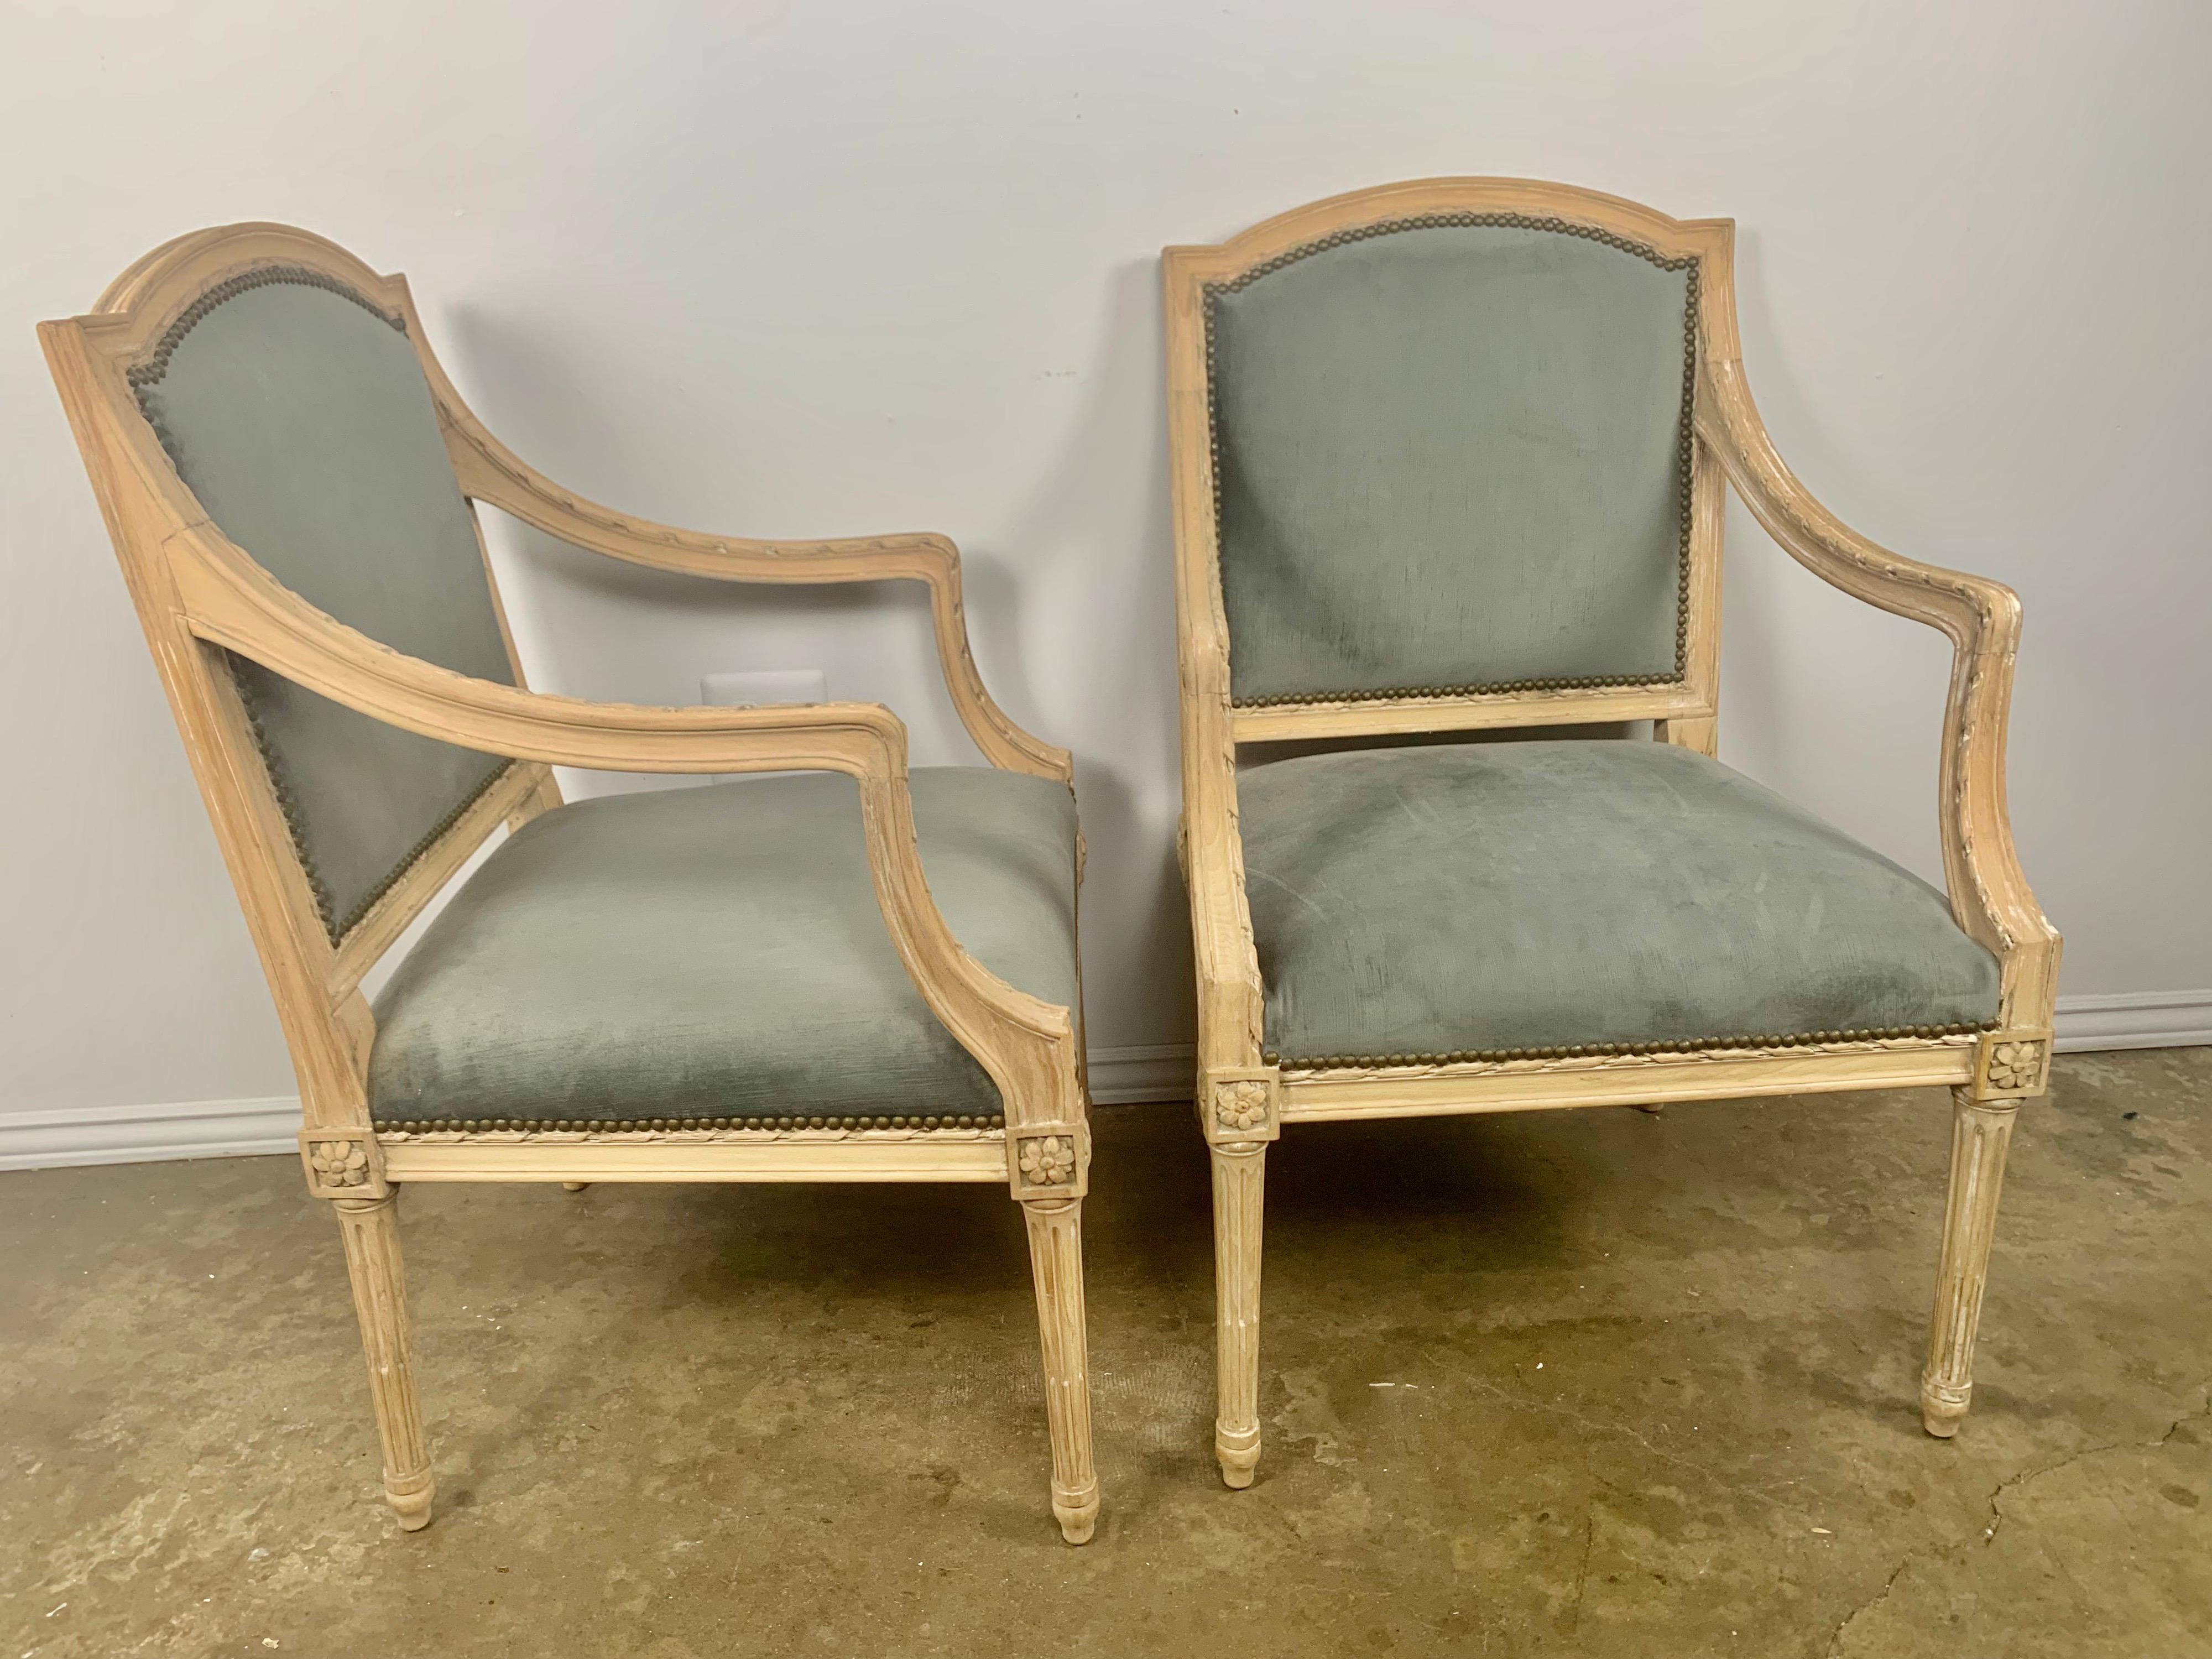 Pair of French Louis XVI style armchairs standing on four straight fluted legs. The chairs have been bleached and refinished. The armchairs are also newly upholstered in a steel blue colored velvet and are ready to install. Measure: 19